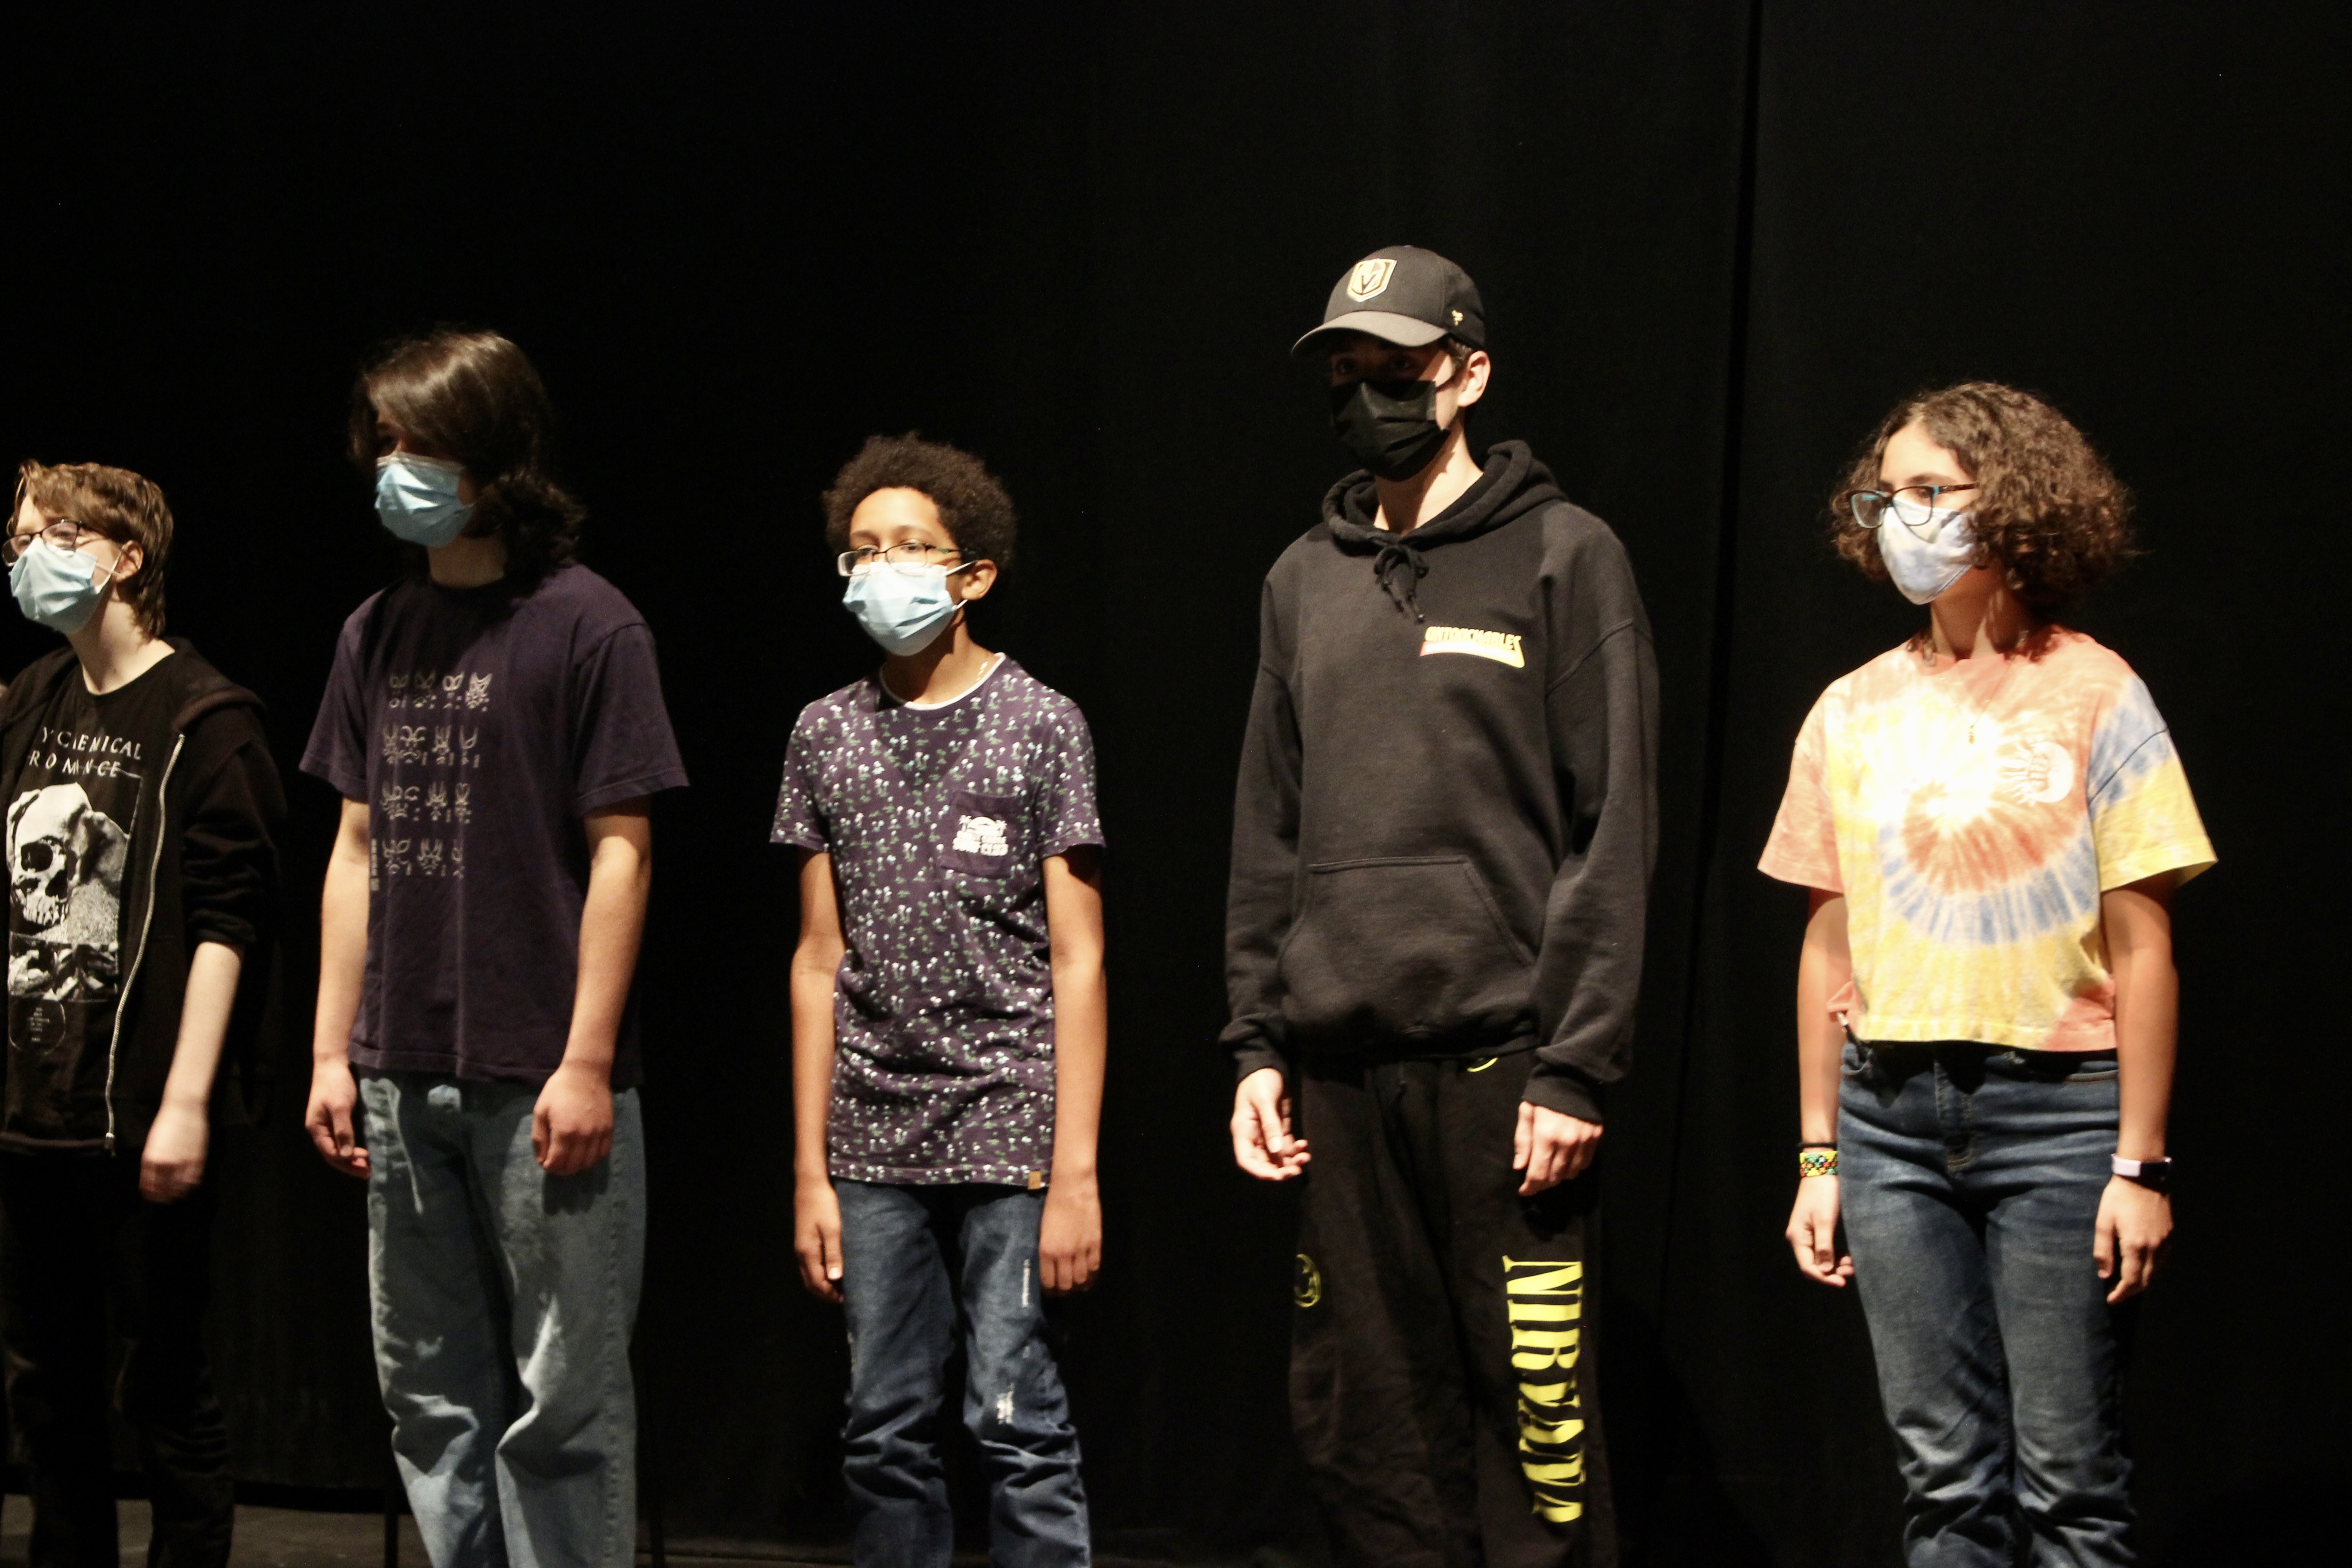 6 youth wearing causal clothing stand in a line, They wear masks. There is a black background.